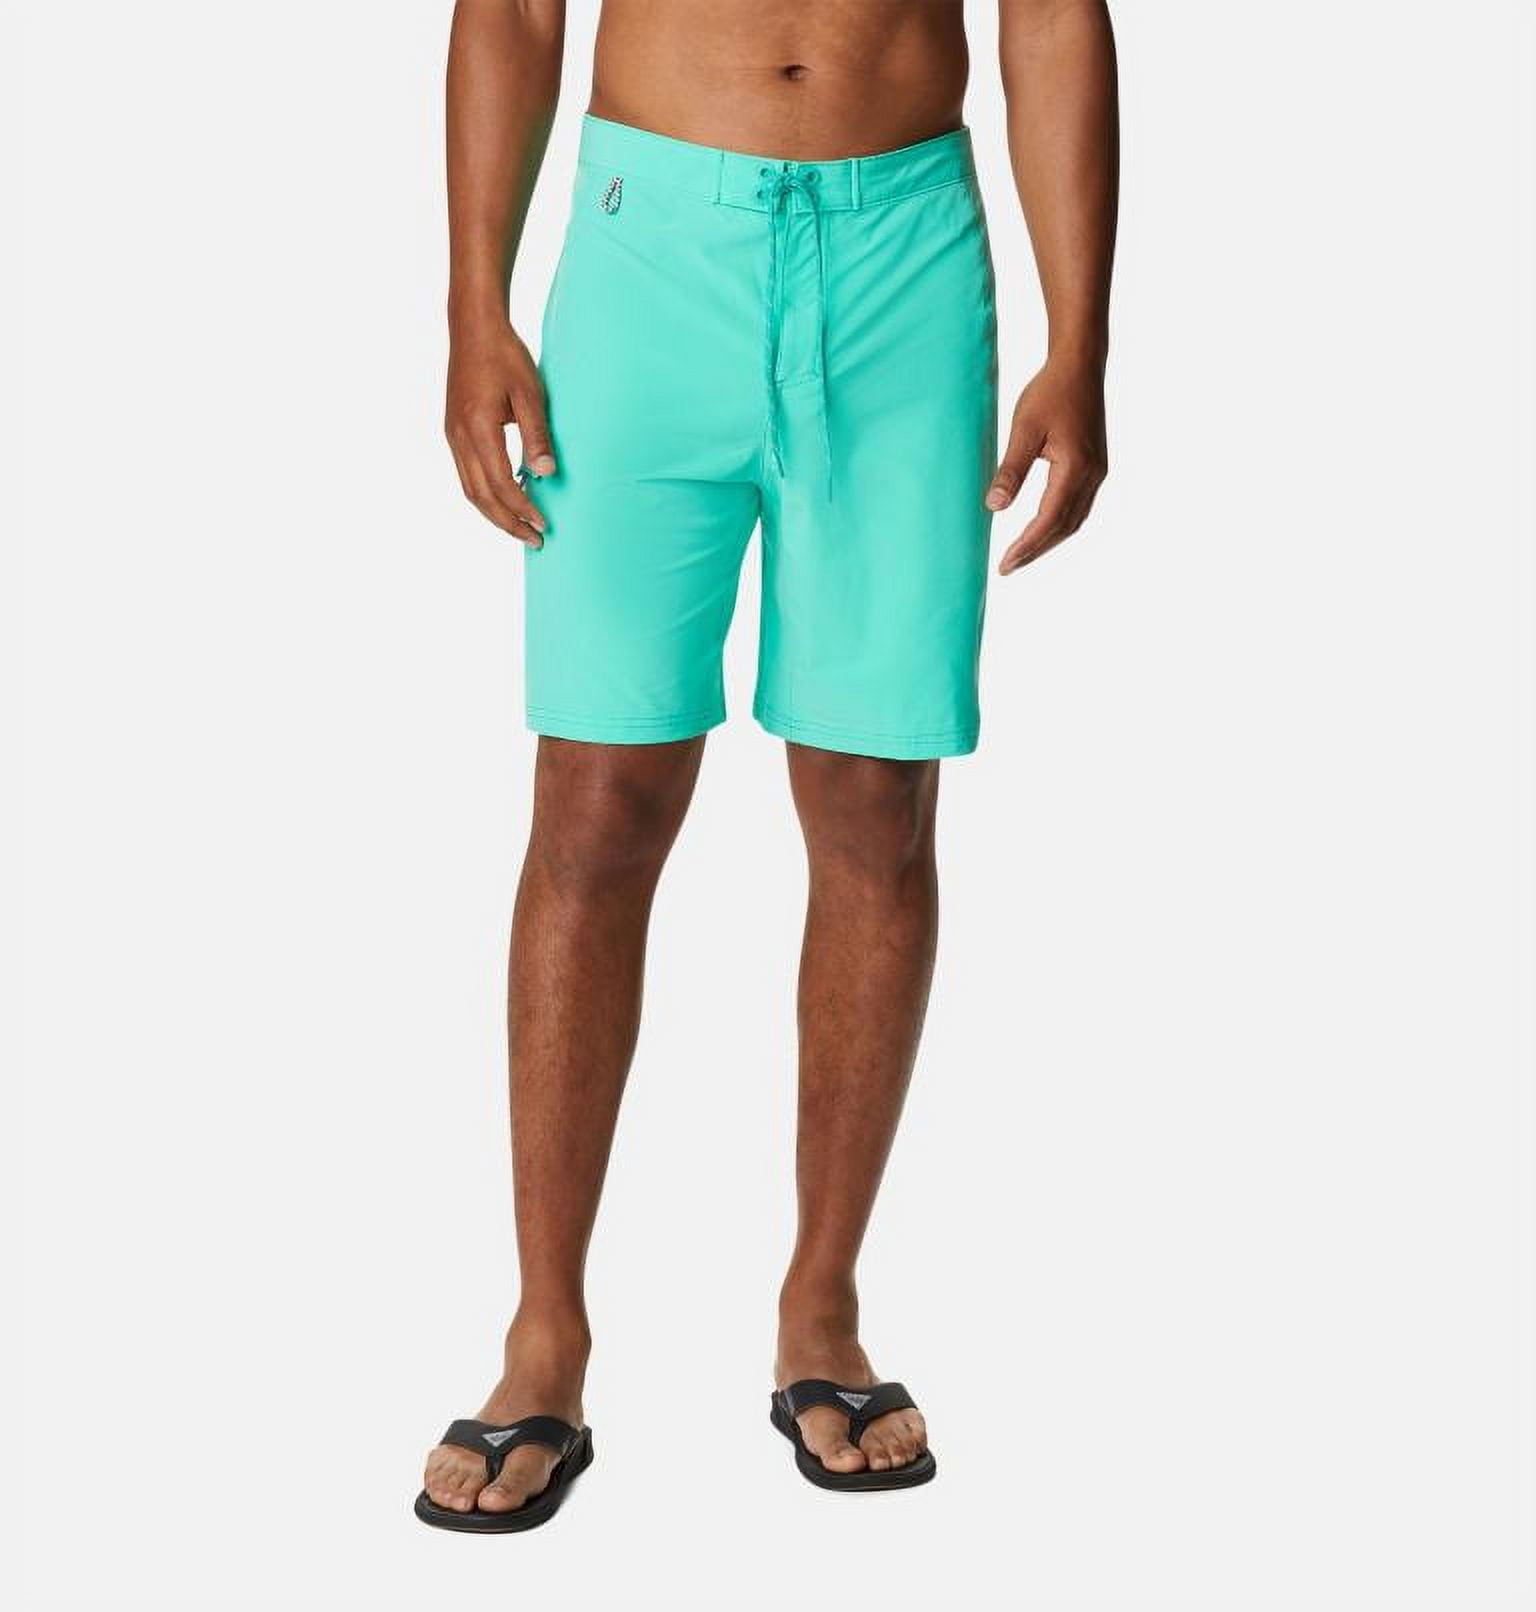 Columbia Men's Terminal Tackle Board Short, Electric Turquoise/Cool Grey,  42 